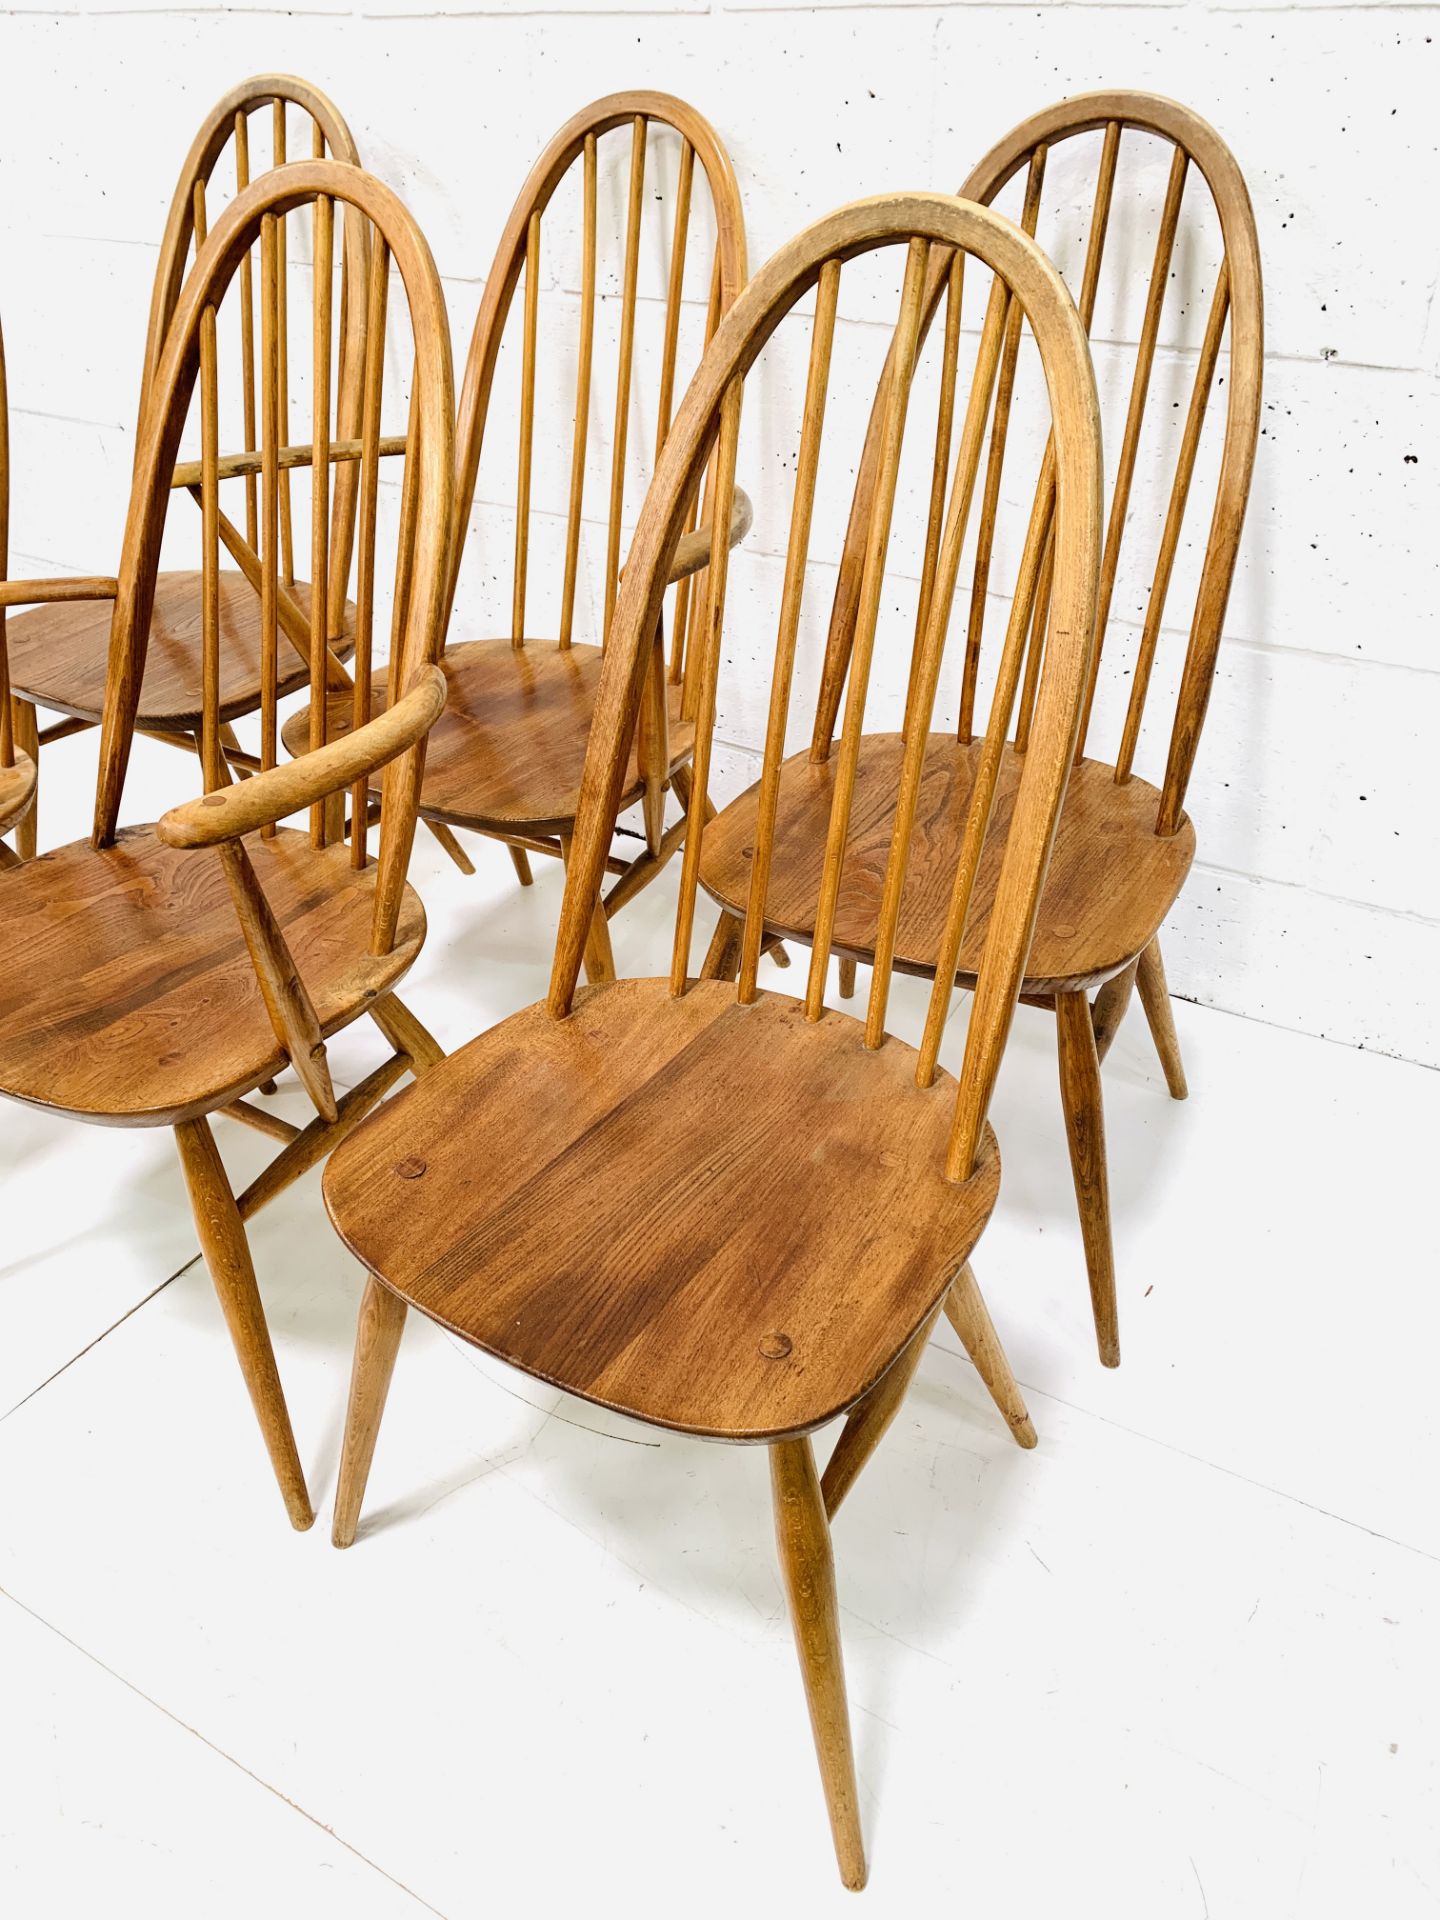 Set of six (4 + 2) Ercol high rail back dining chairs - Image 3 of 5